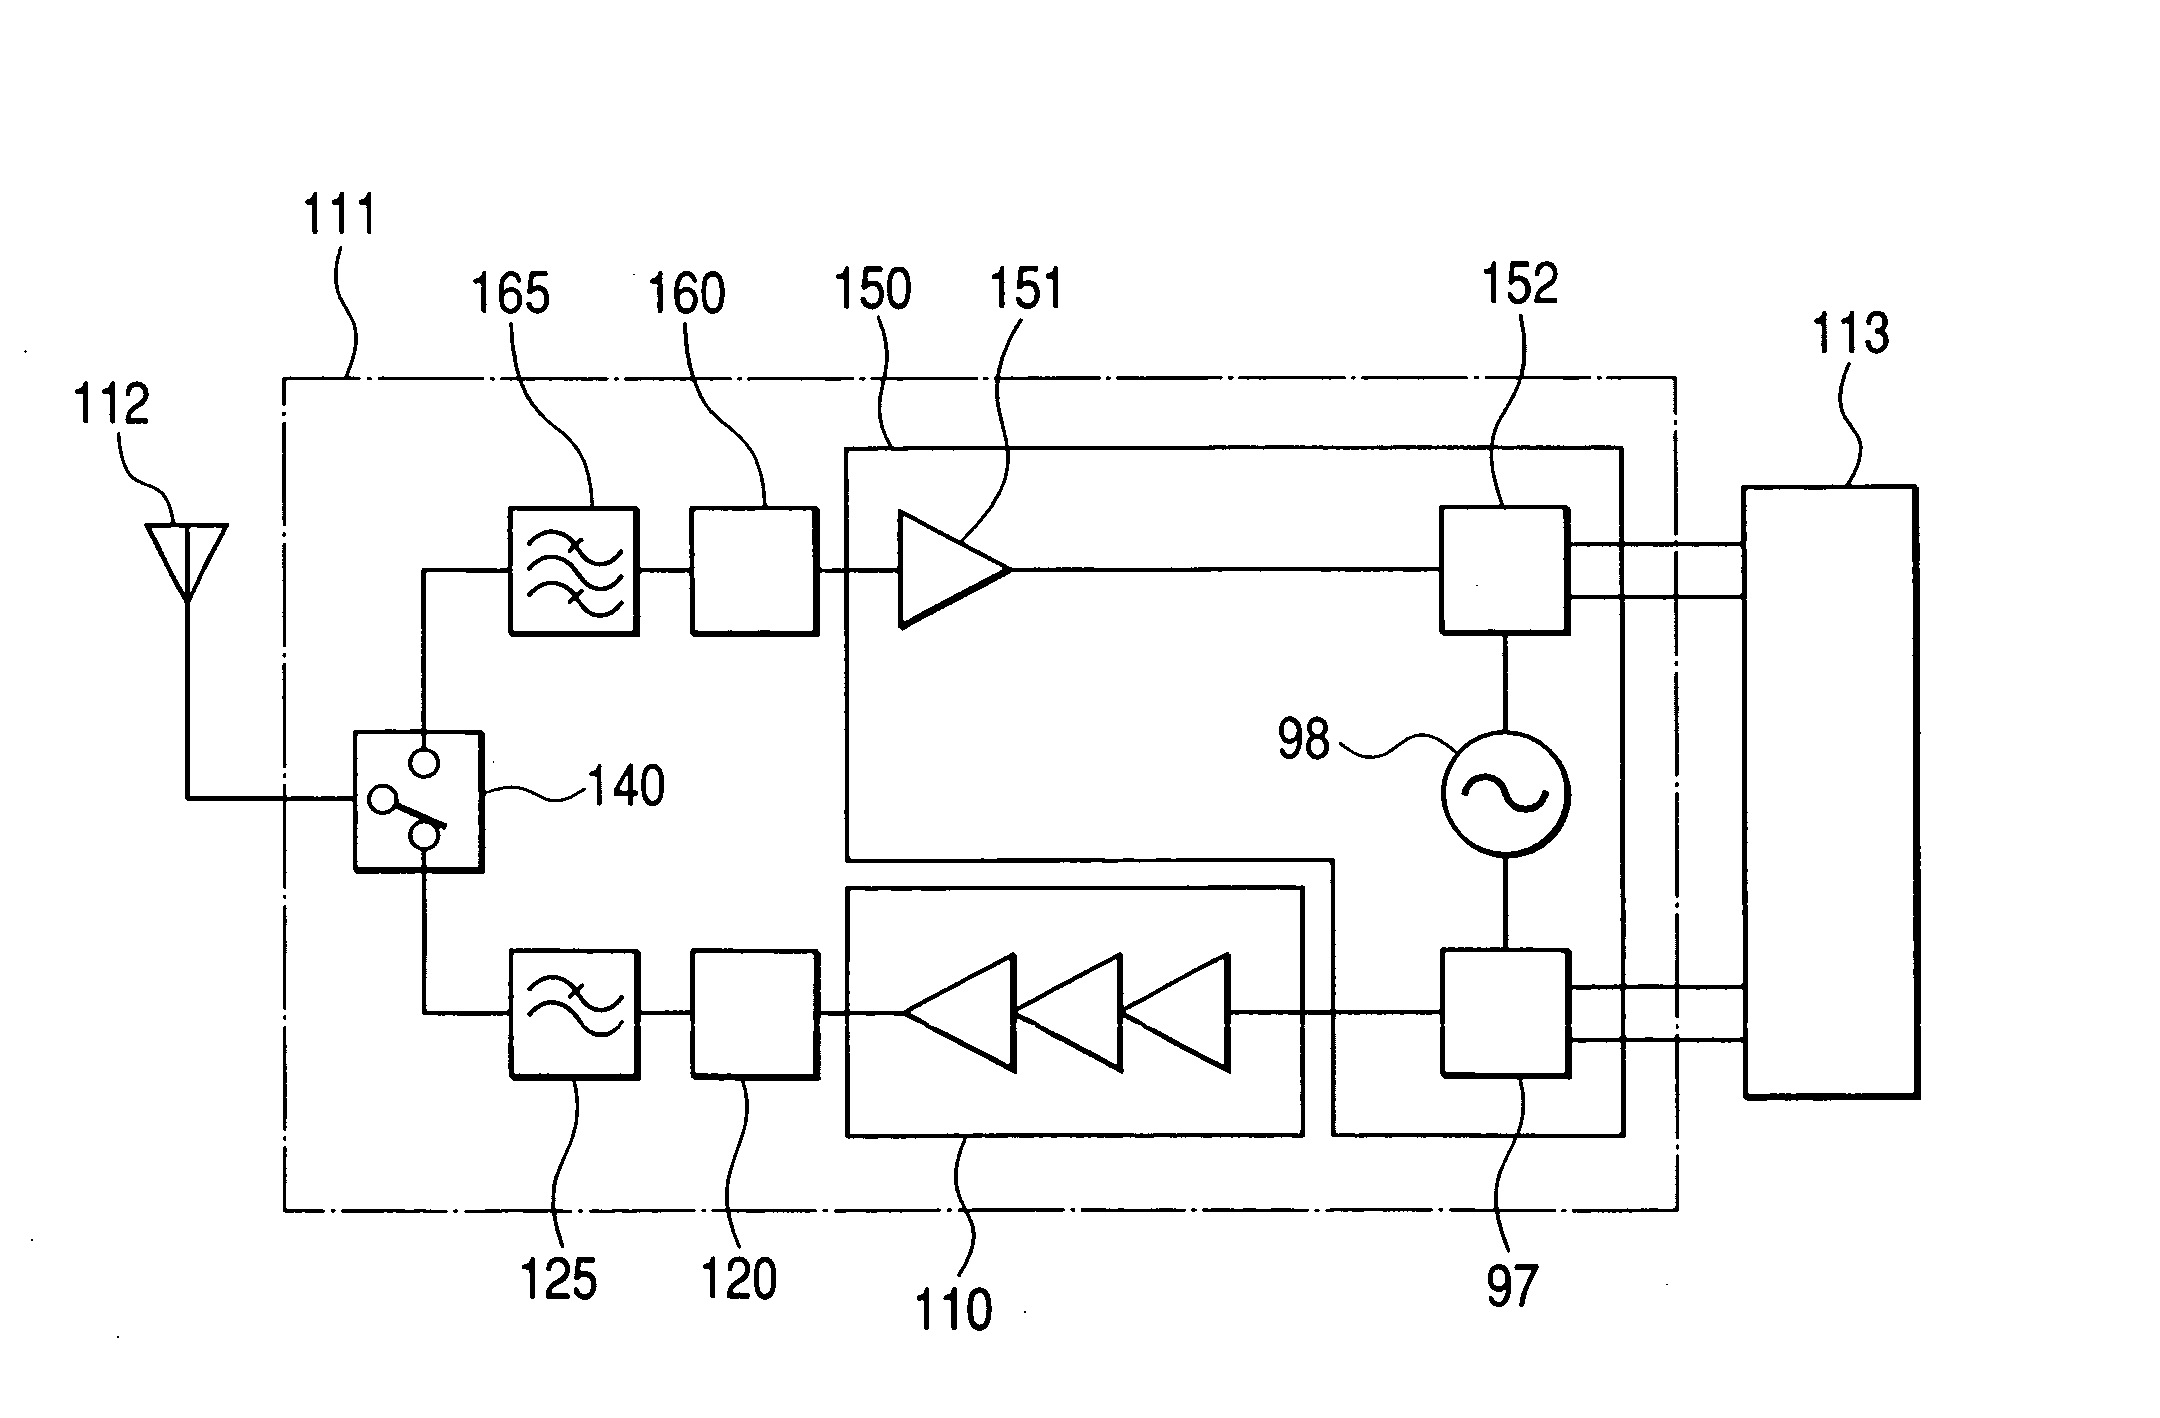 Semiconductor devices with inductors